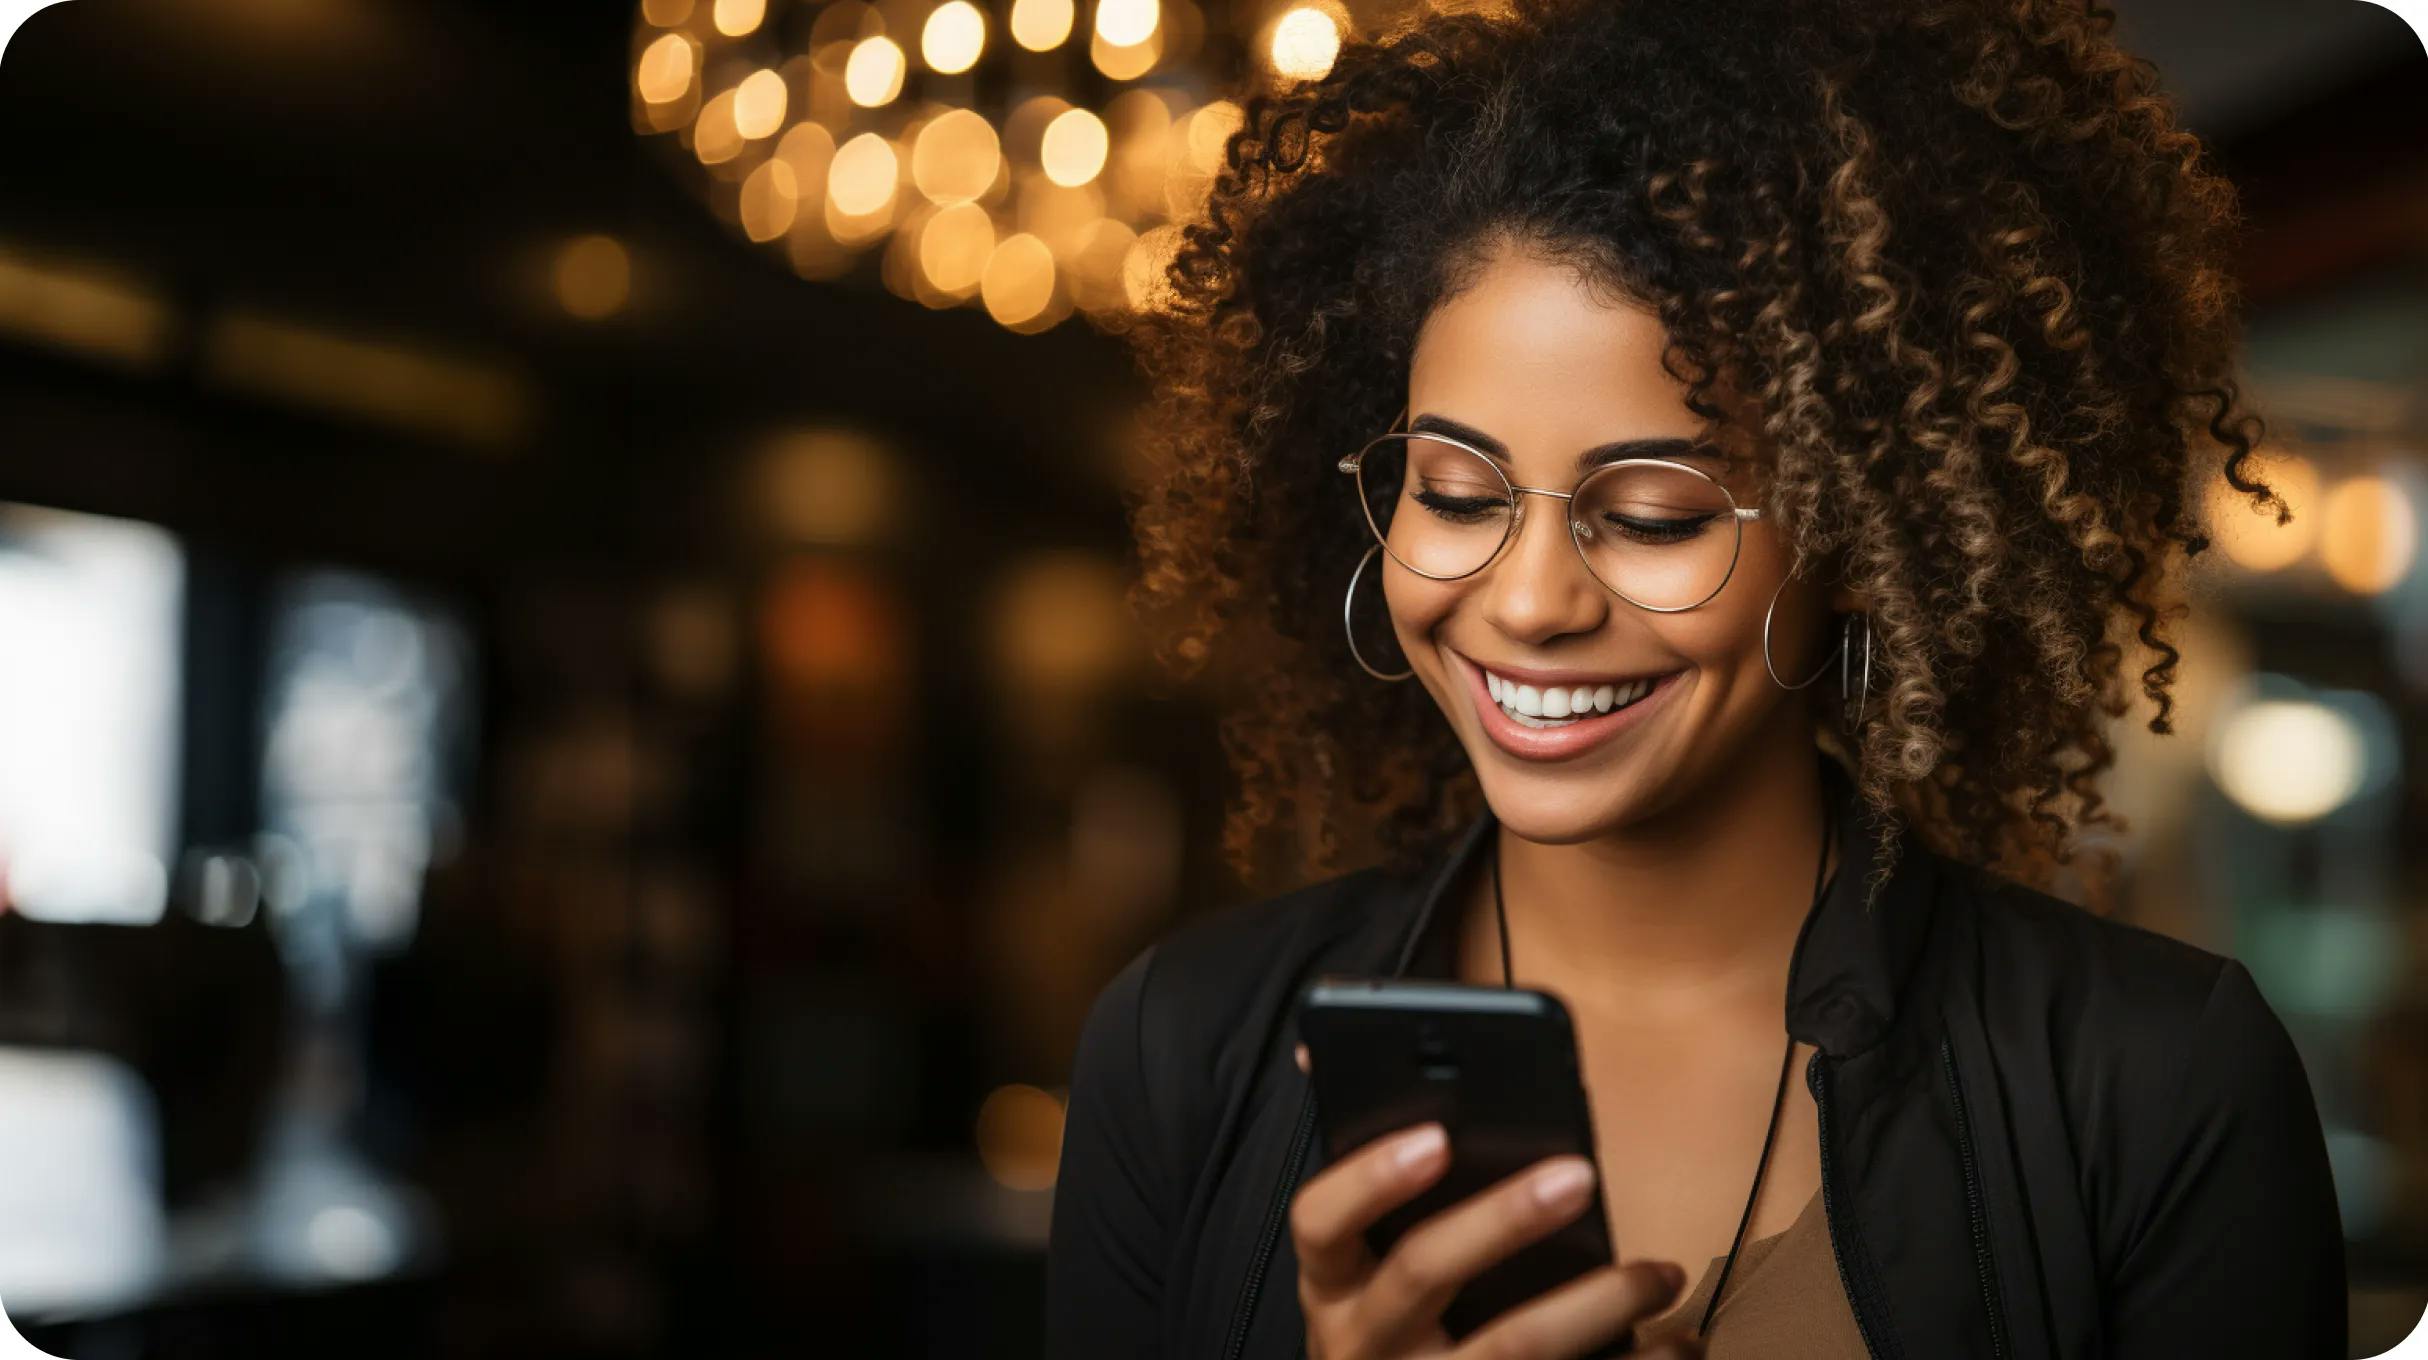 Smiling woman looking at the smartphone screen in a restaurant